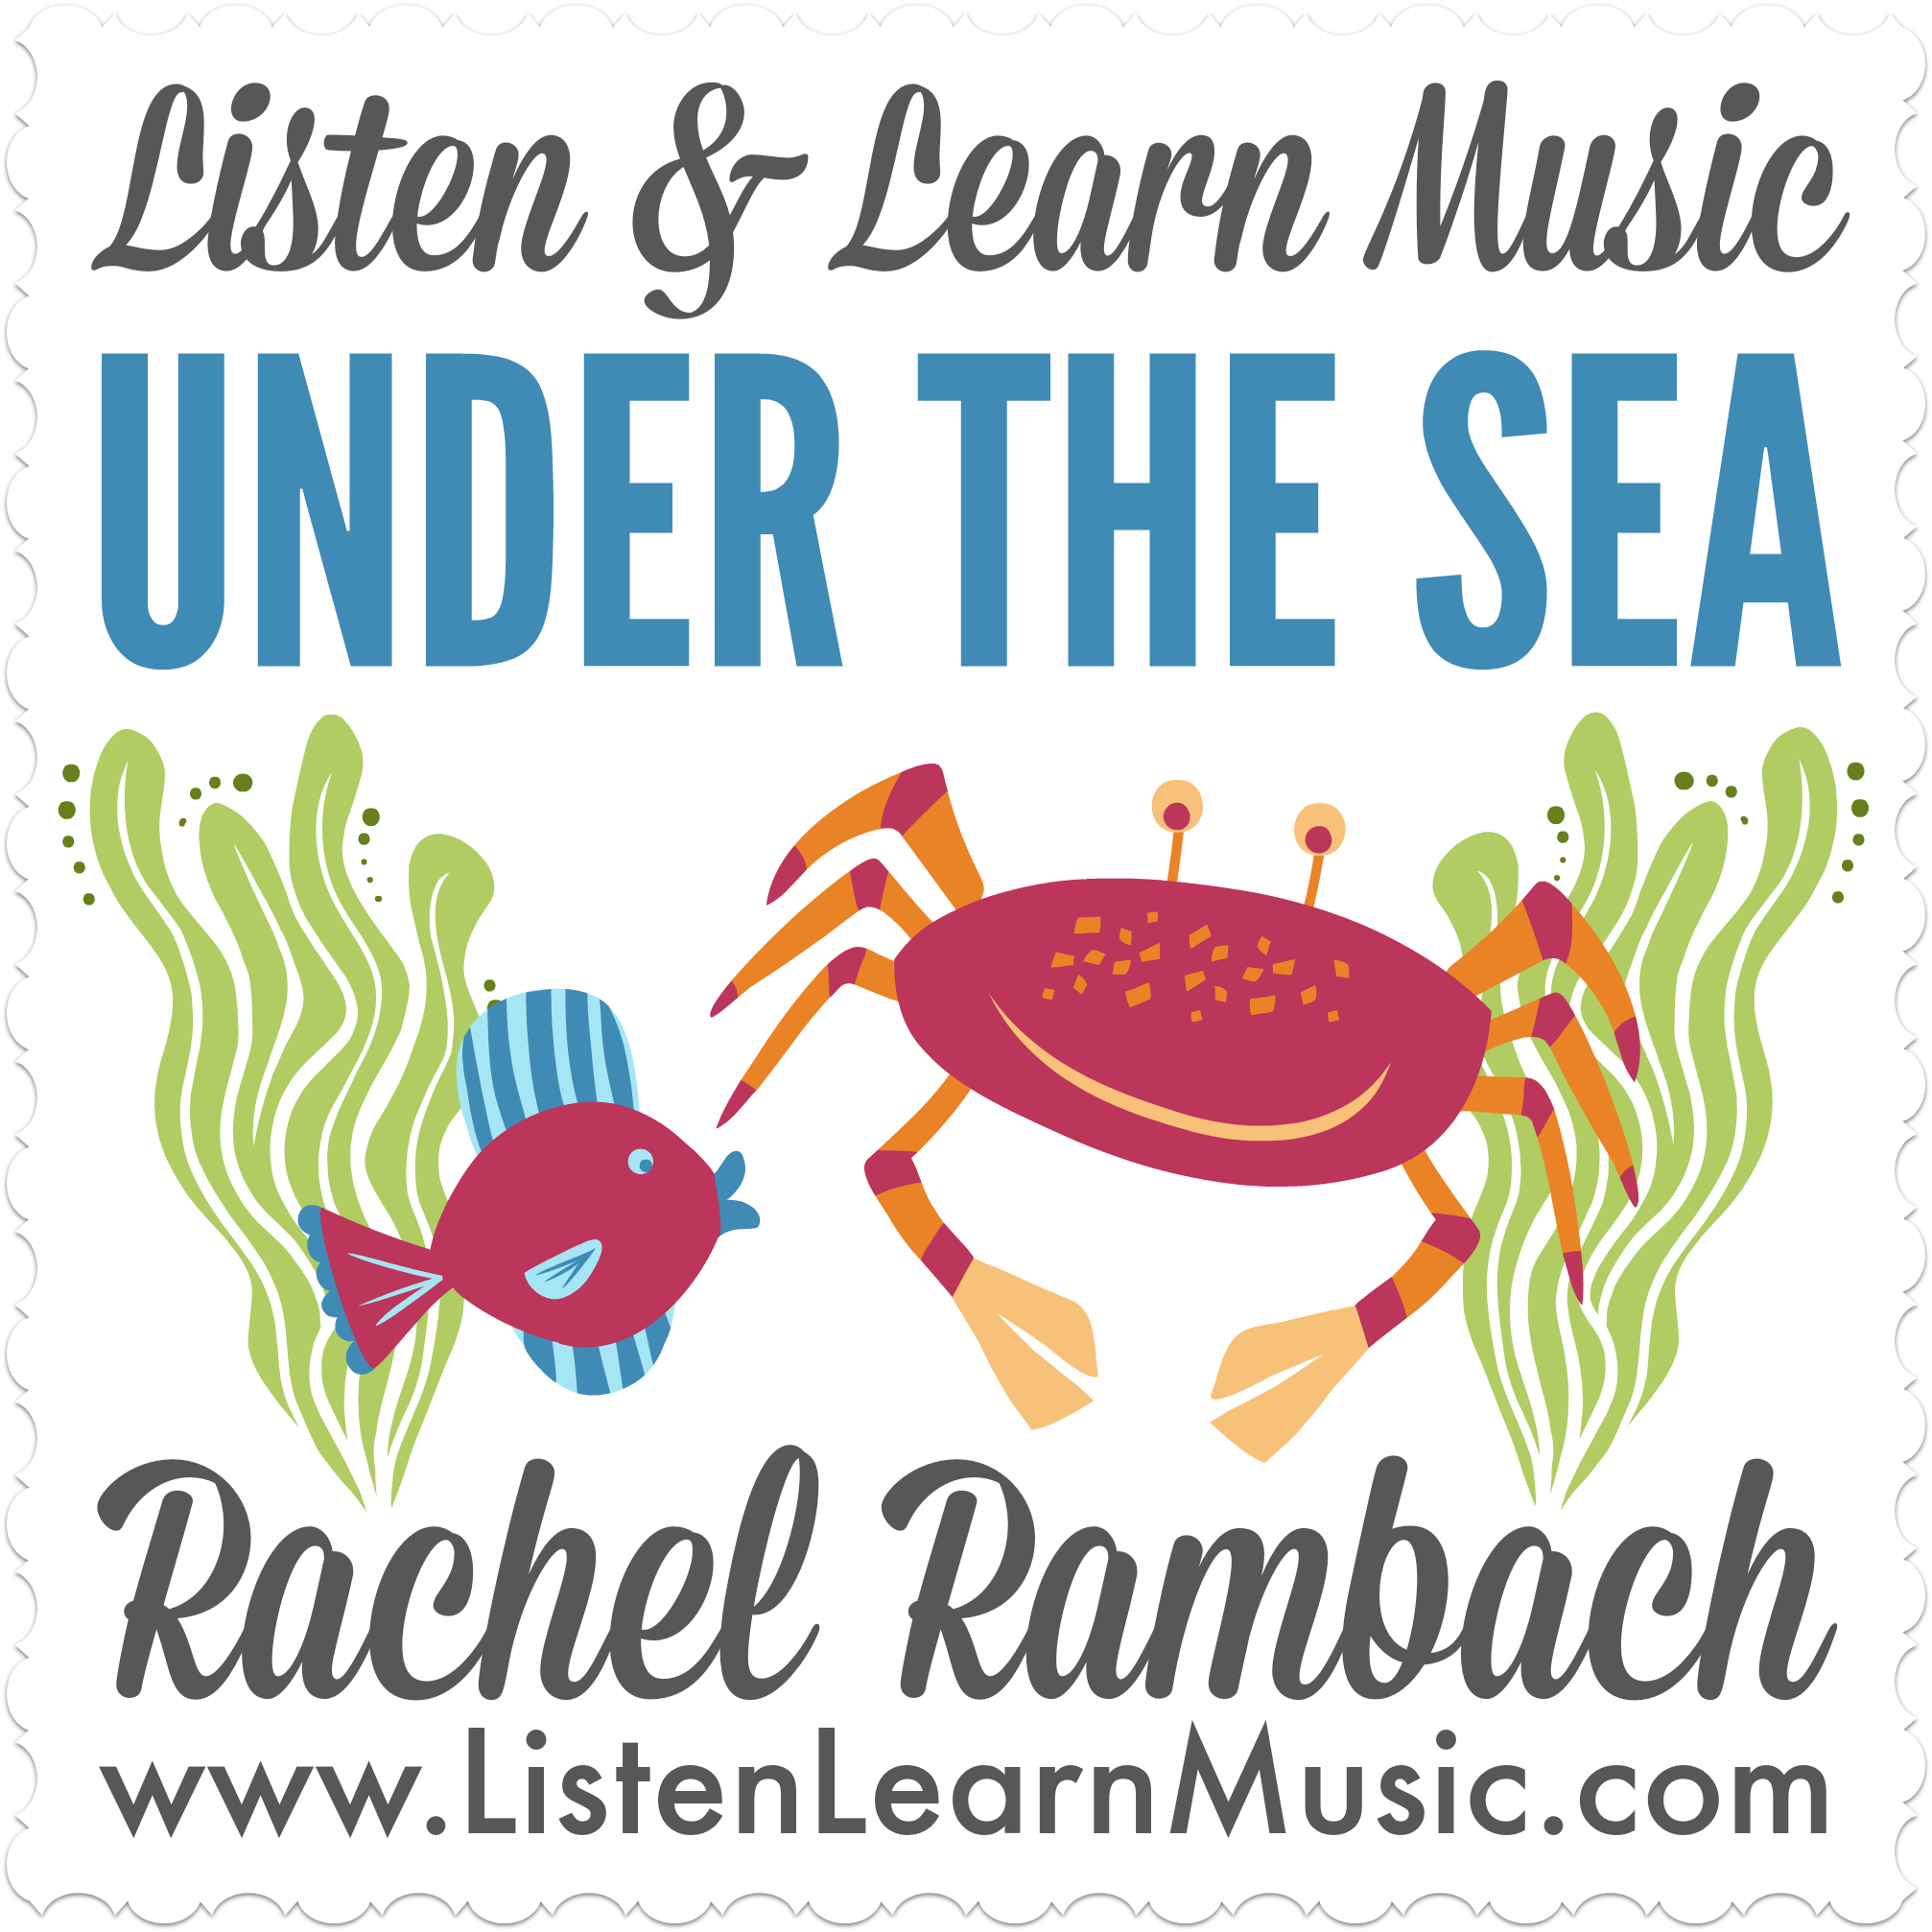 "Under the Sea" Adapted for Castanets!